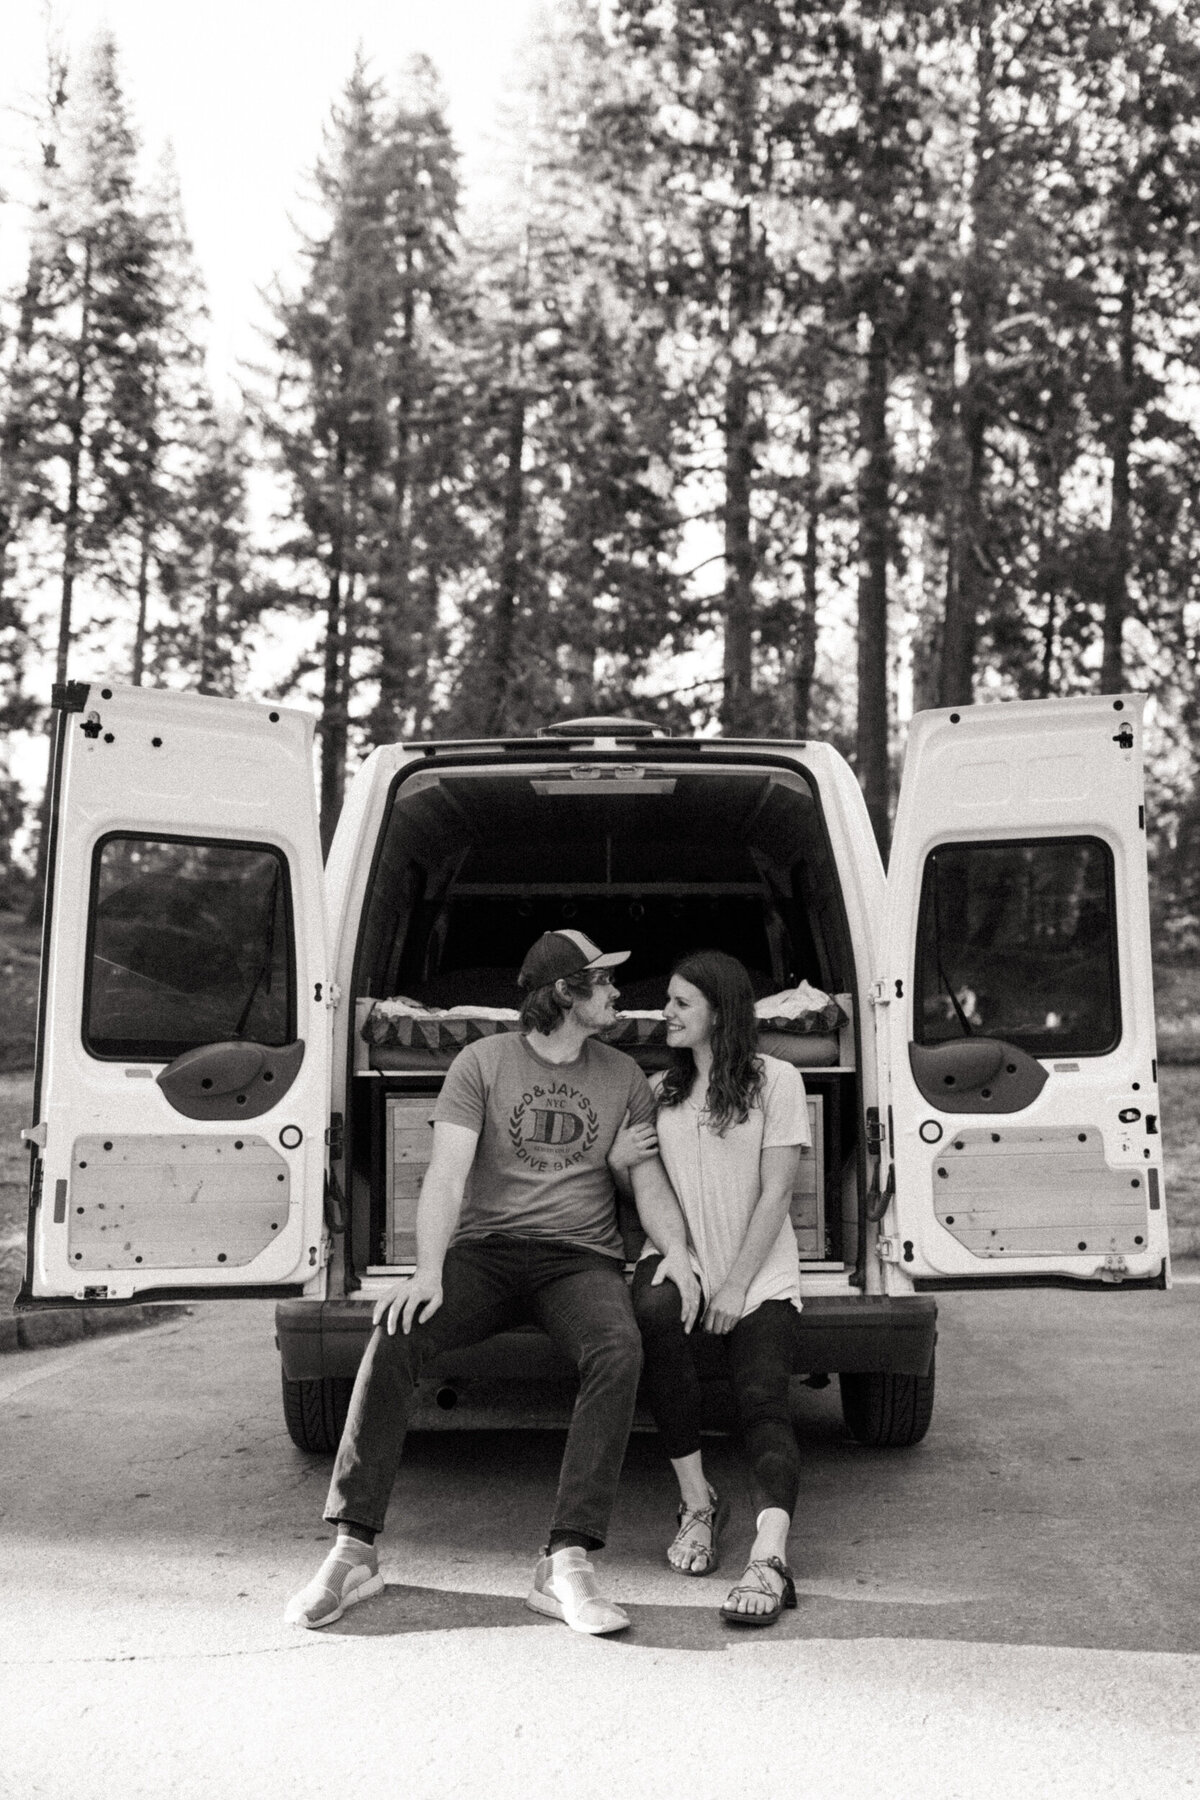 Couple sitting on their camper van in the woods with trees behind them